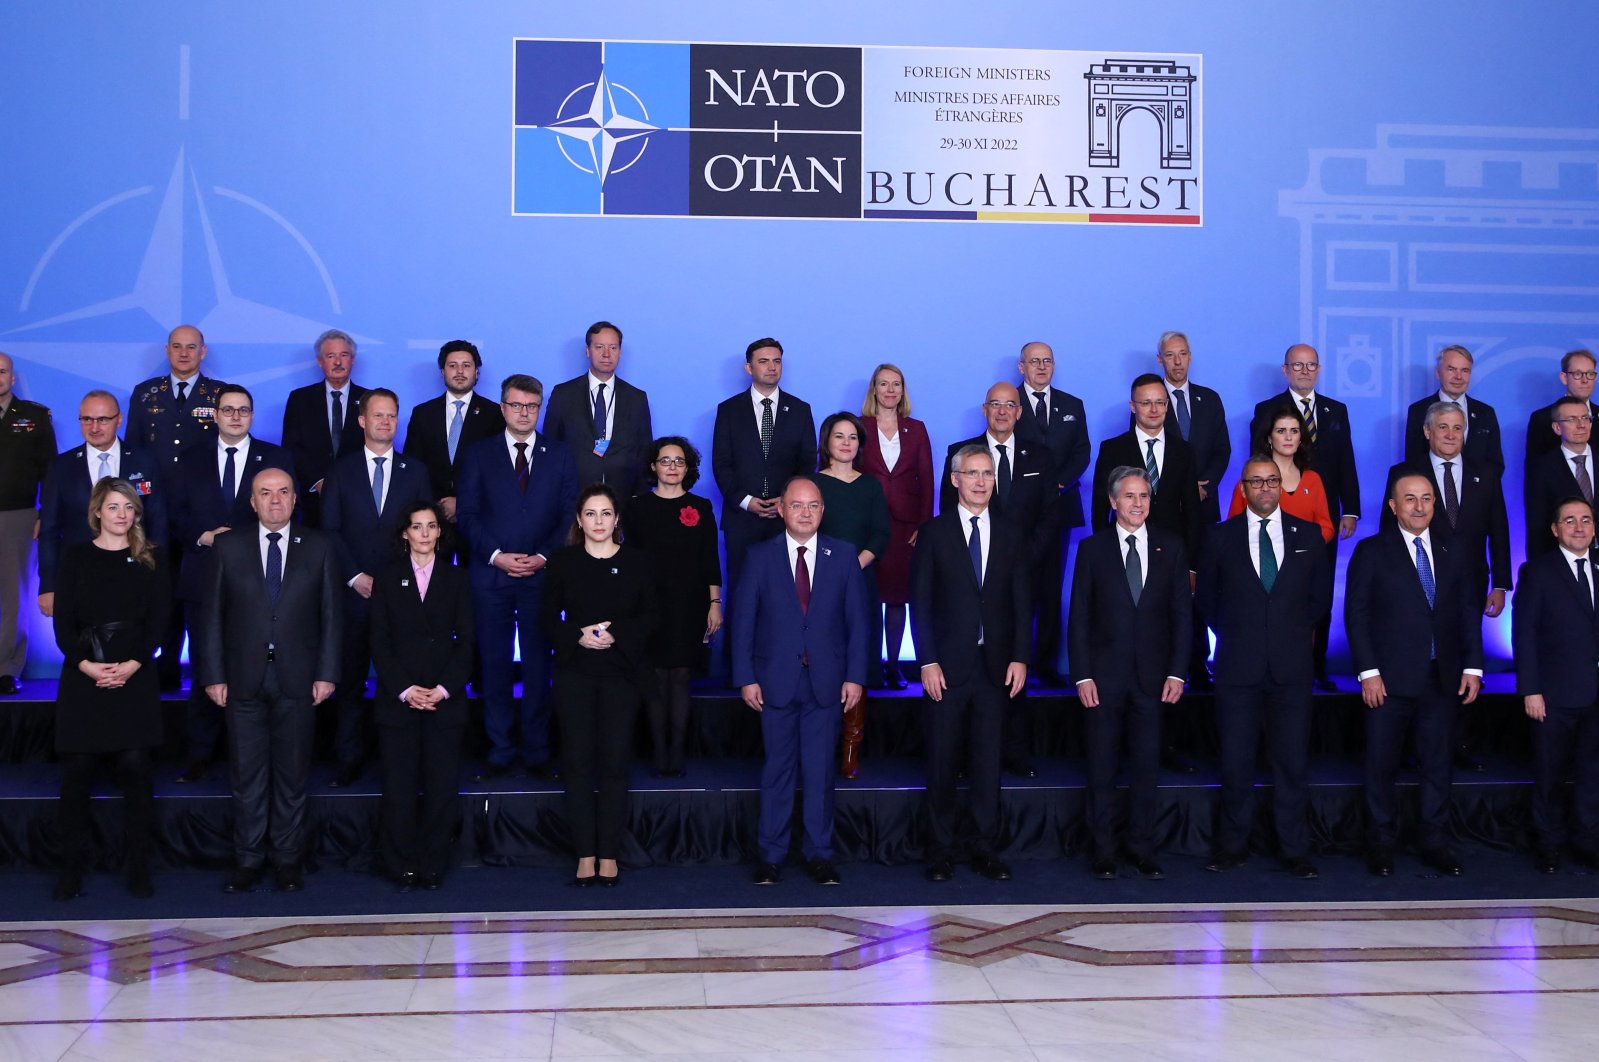 NATO Secretary-General Jens Stoltenberg poses with the foreign ministers of NATO countries during the family photo at their meeting in Bucharest, Romania, Nov. 29, 2022. (REUTERS Photo)